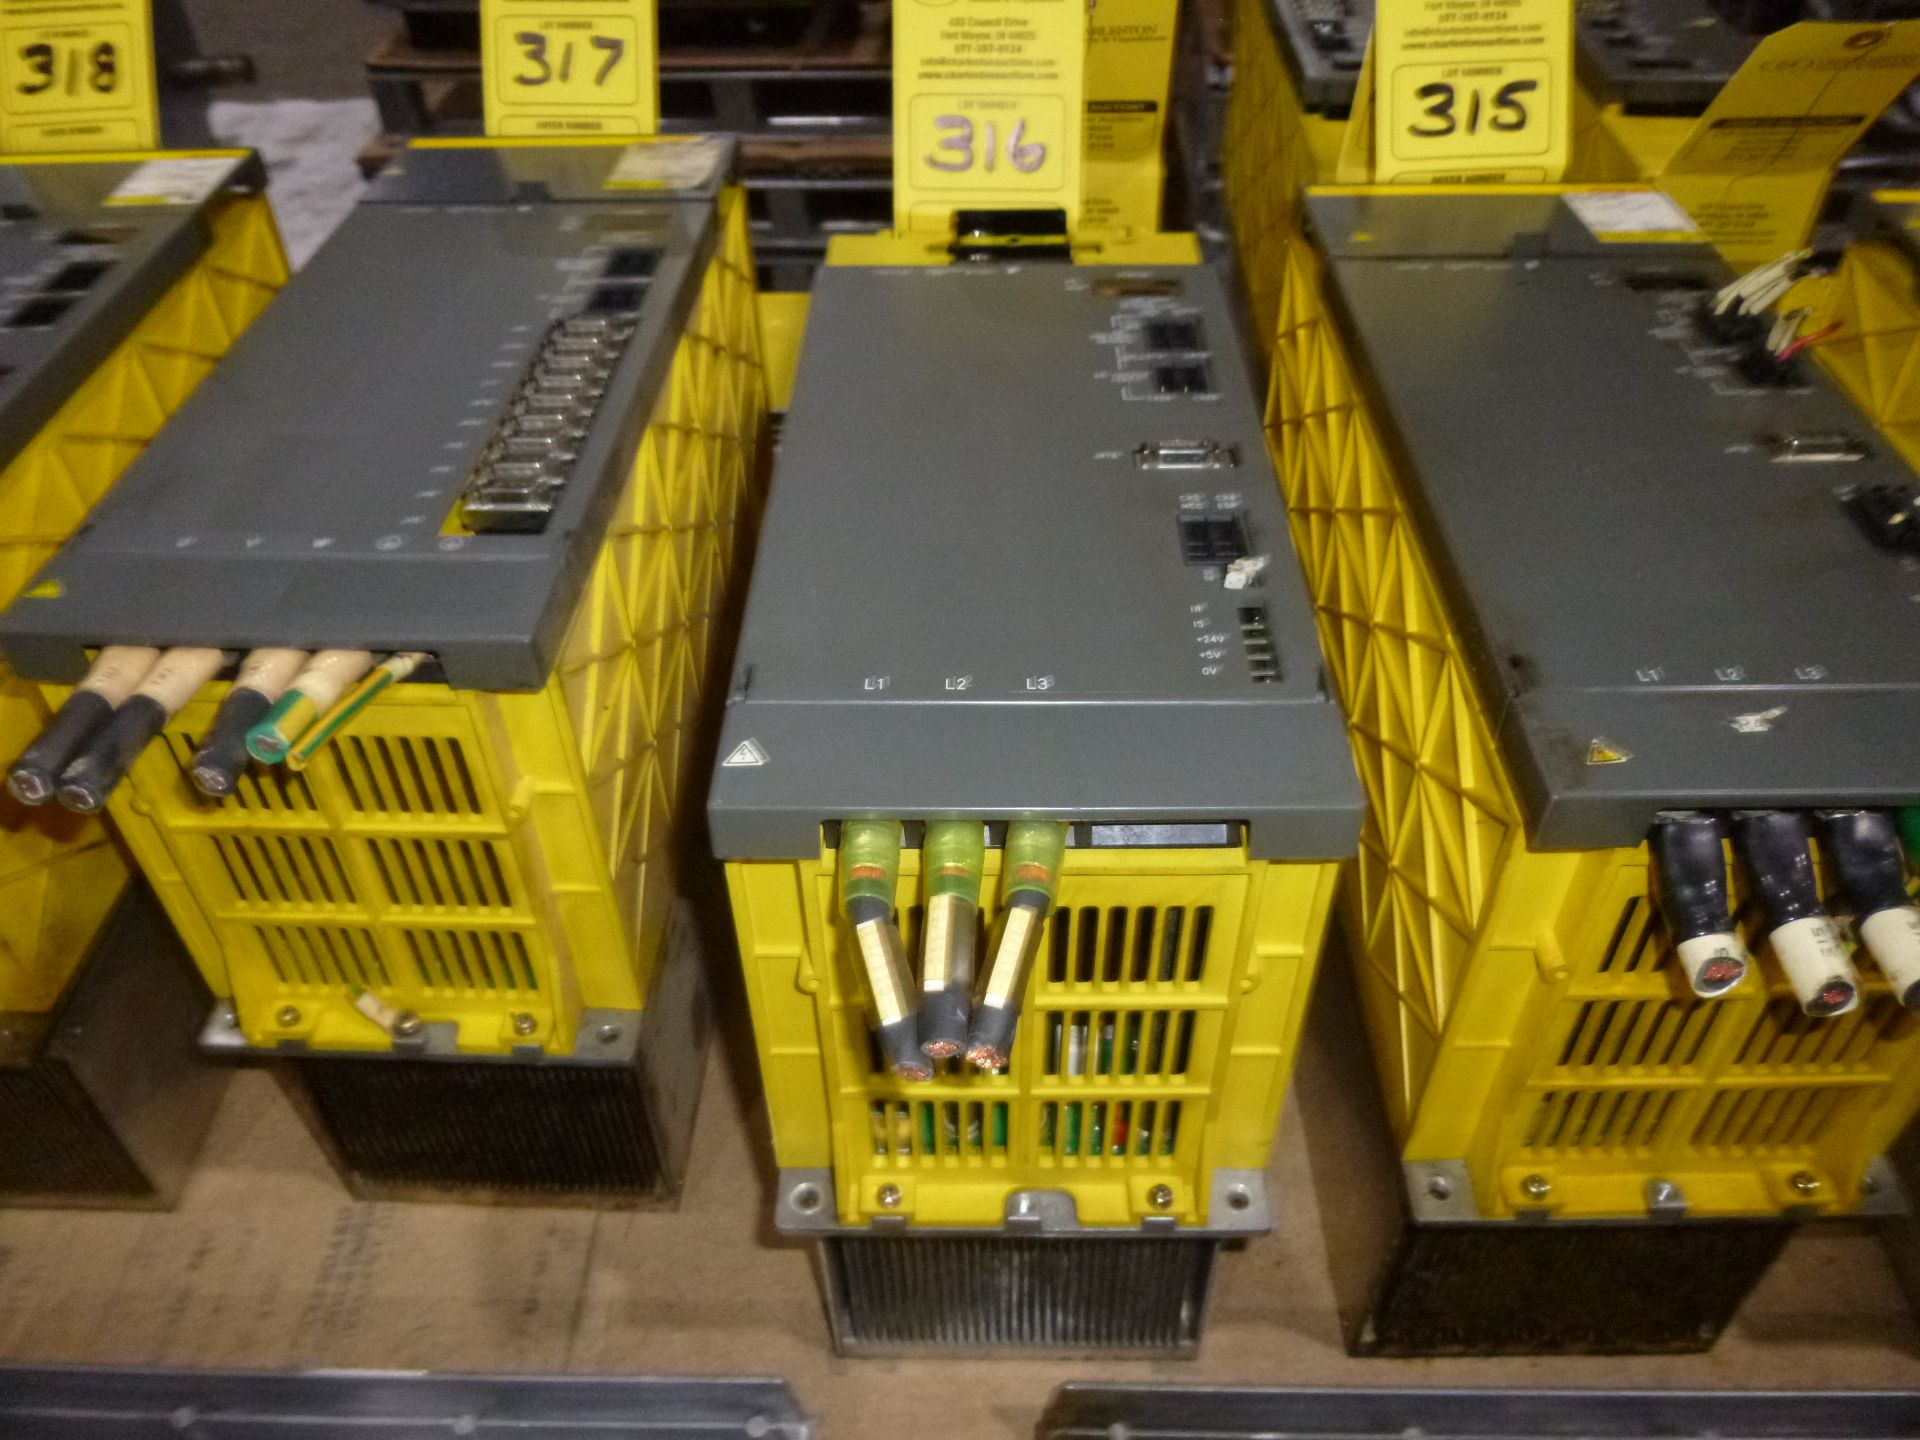 Fanuc module A06B series, full part number unknown as front panel cover is missing, as always with